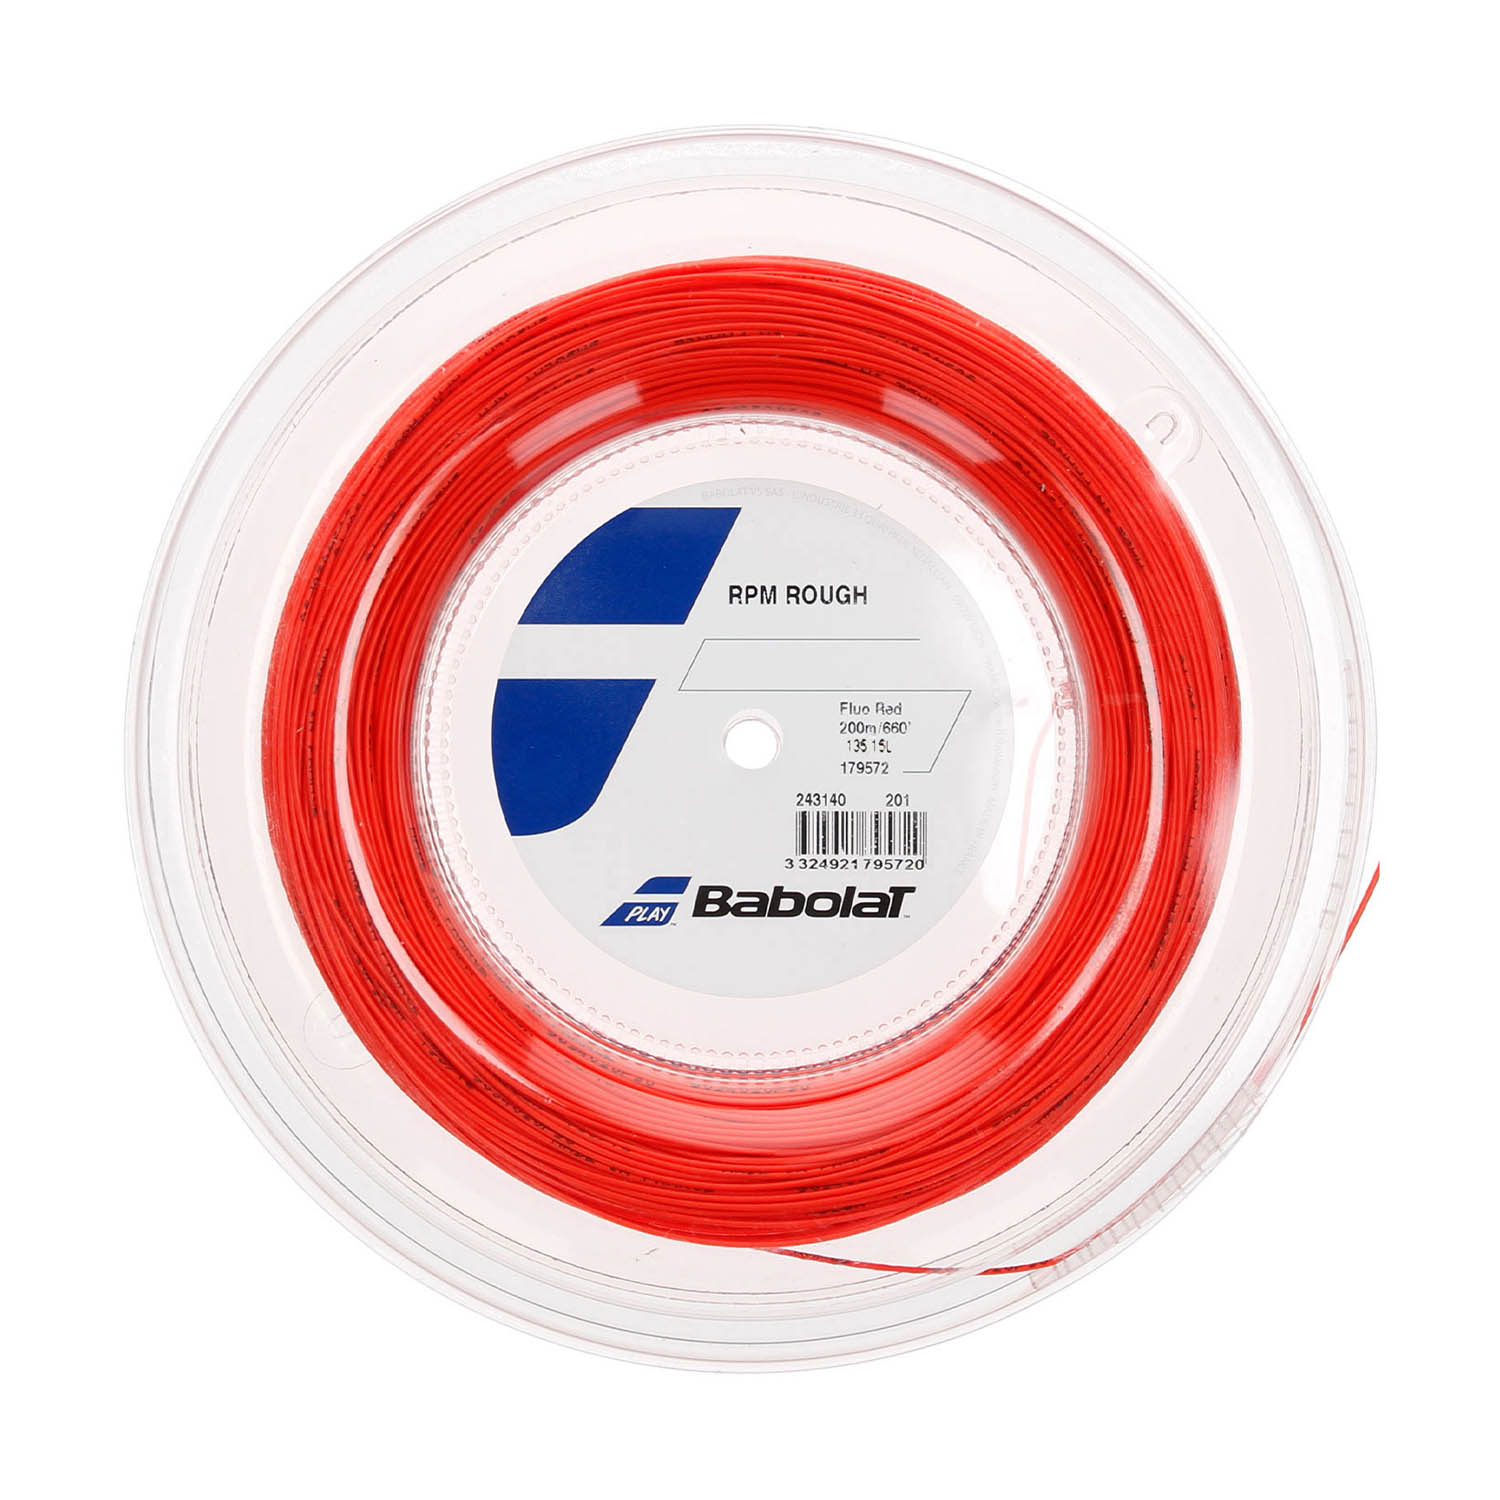 Babolat RPM Rough 1.35 200 m String Reel - Red Fluo